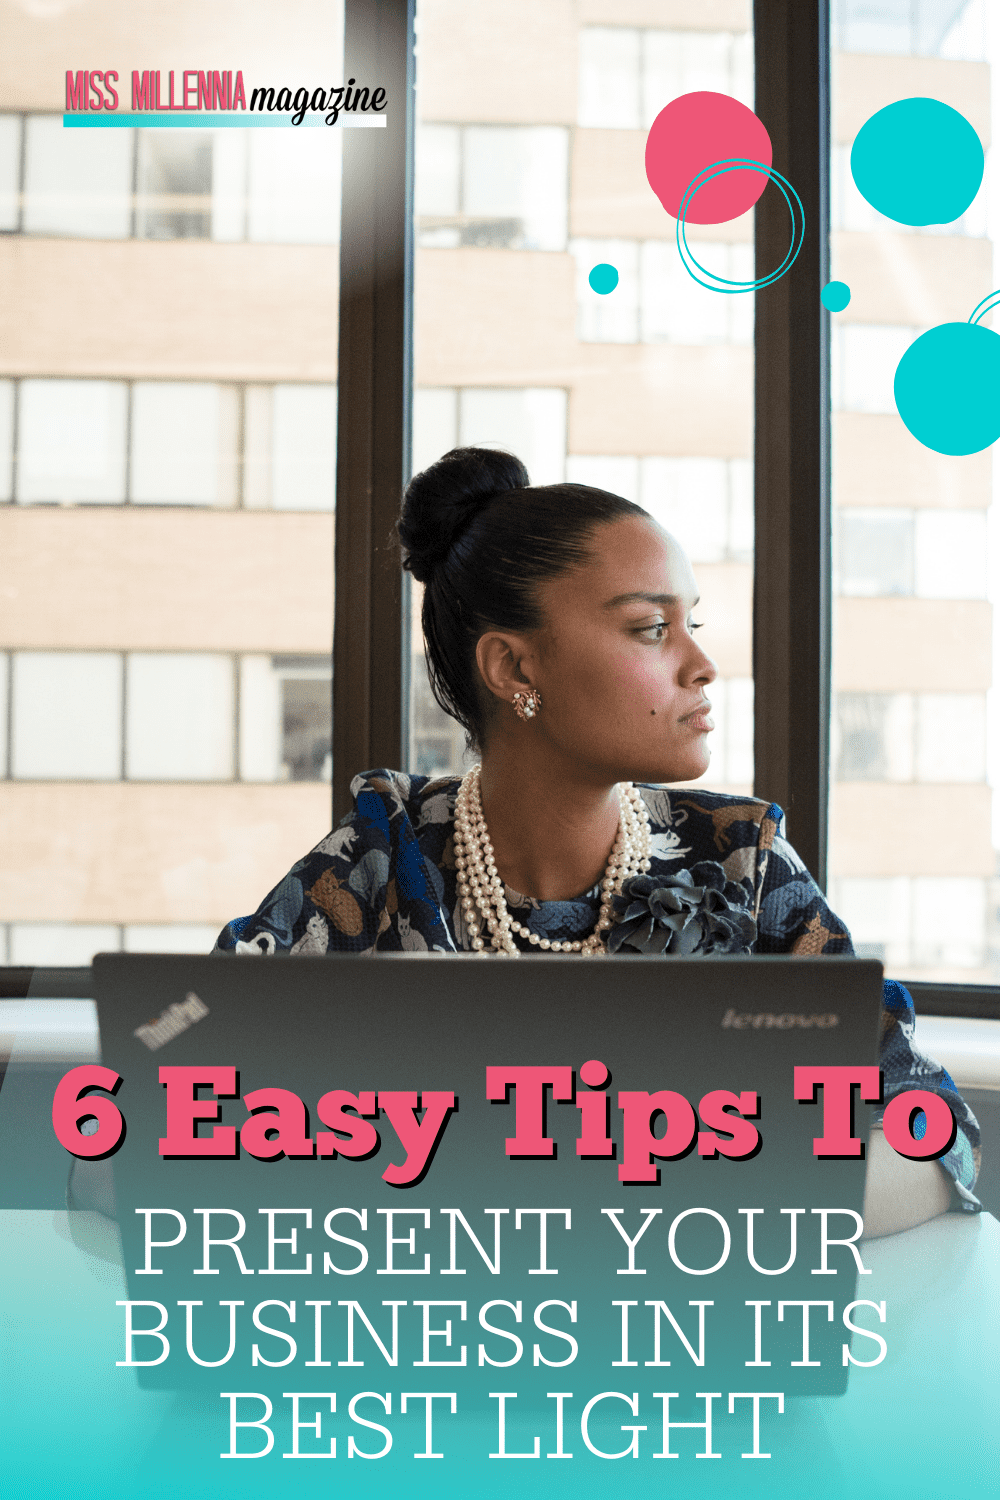 6 Easy Tips To Present Your Business In Its Best Light